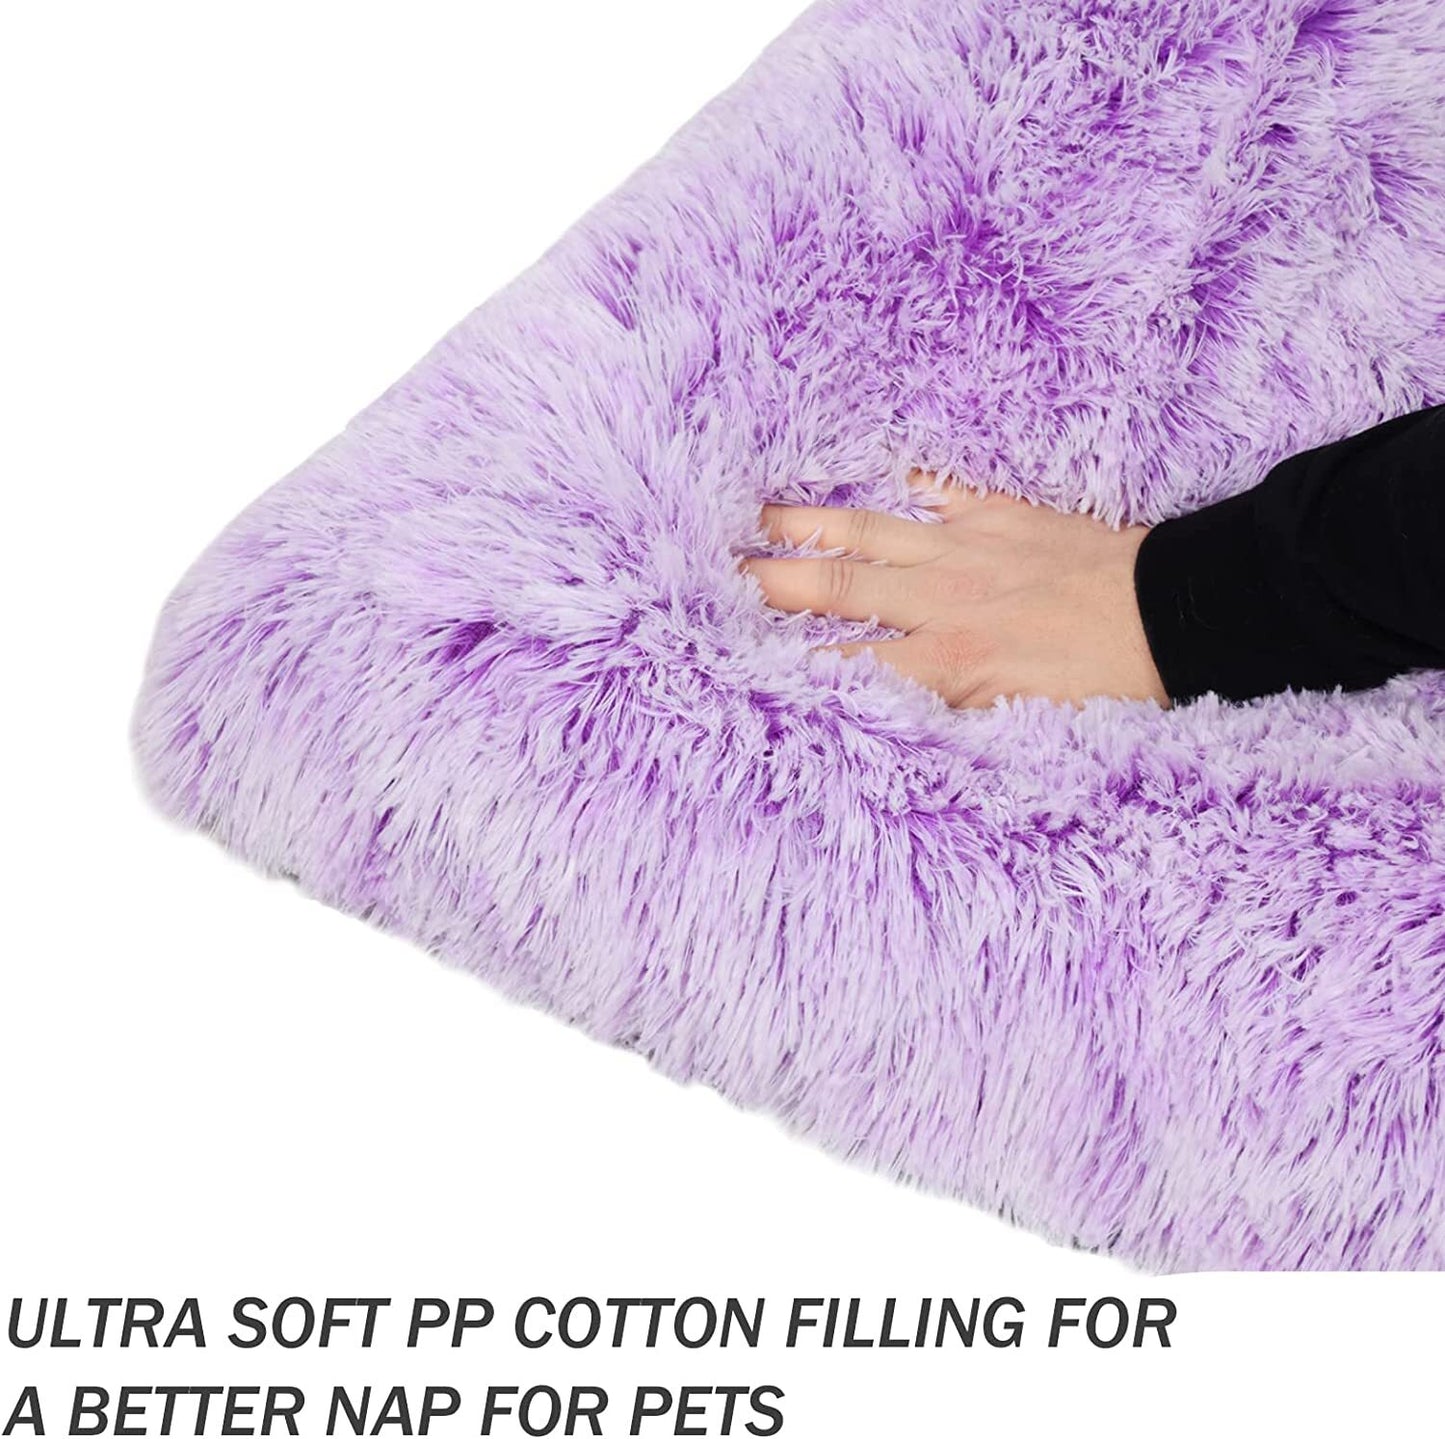 Exclusivo Mecla Soft Plush Dog Bed Crate Mat for Small Dogs (32*22*4 in), Faux Fur Fluffy Dog Pet Cat Kennel Pad with Anti-Slip Bottom, Machine Washable Gradient Purple